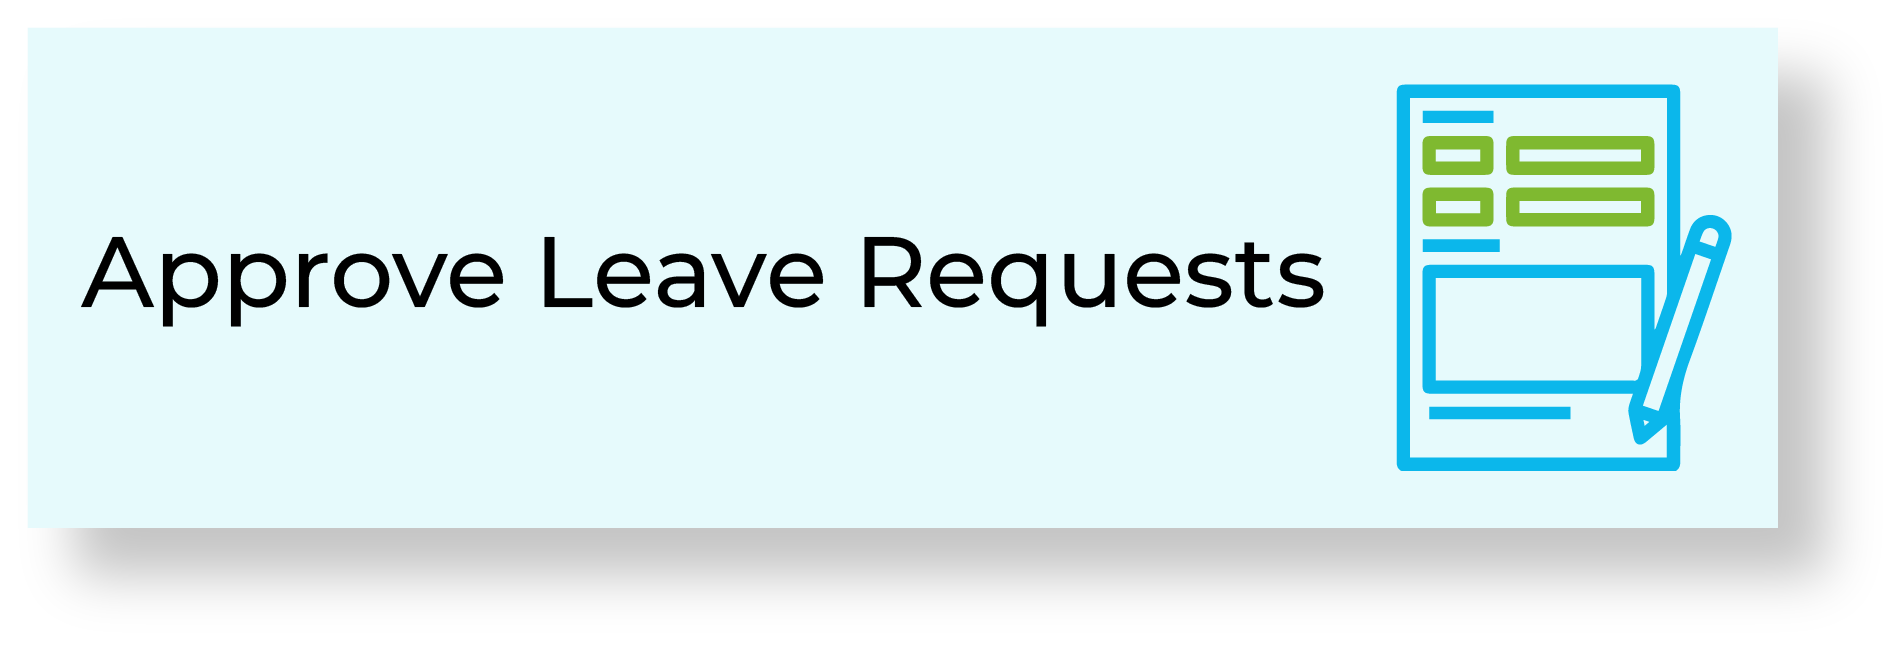 Approve Leave Requests